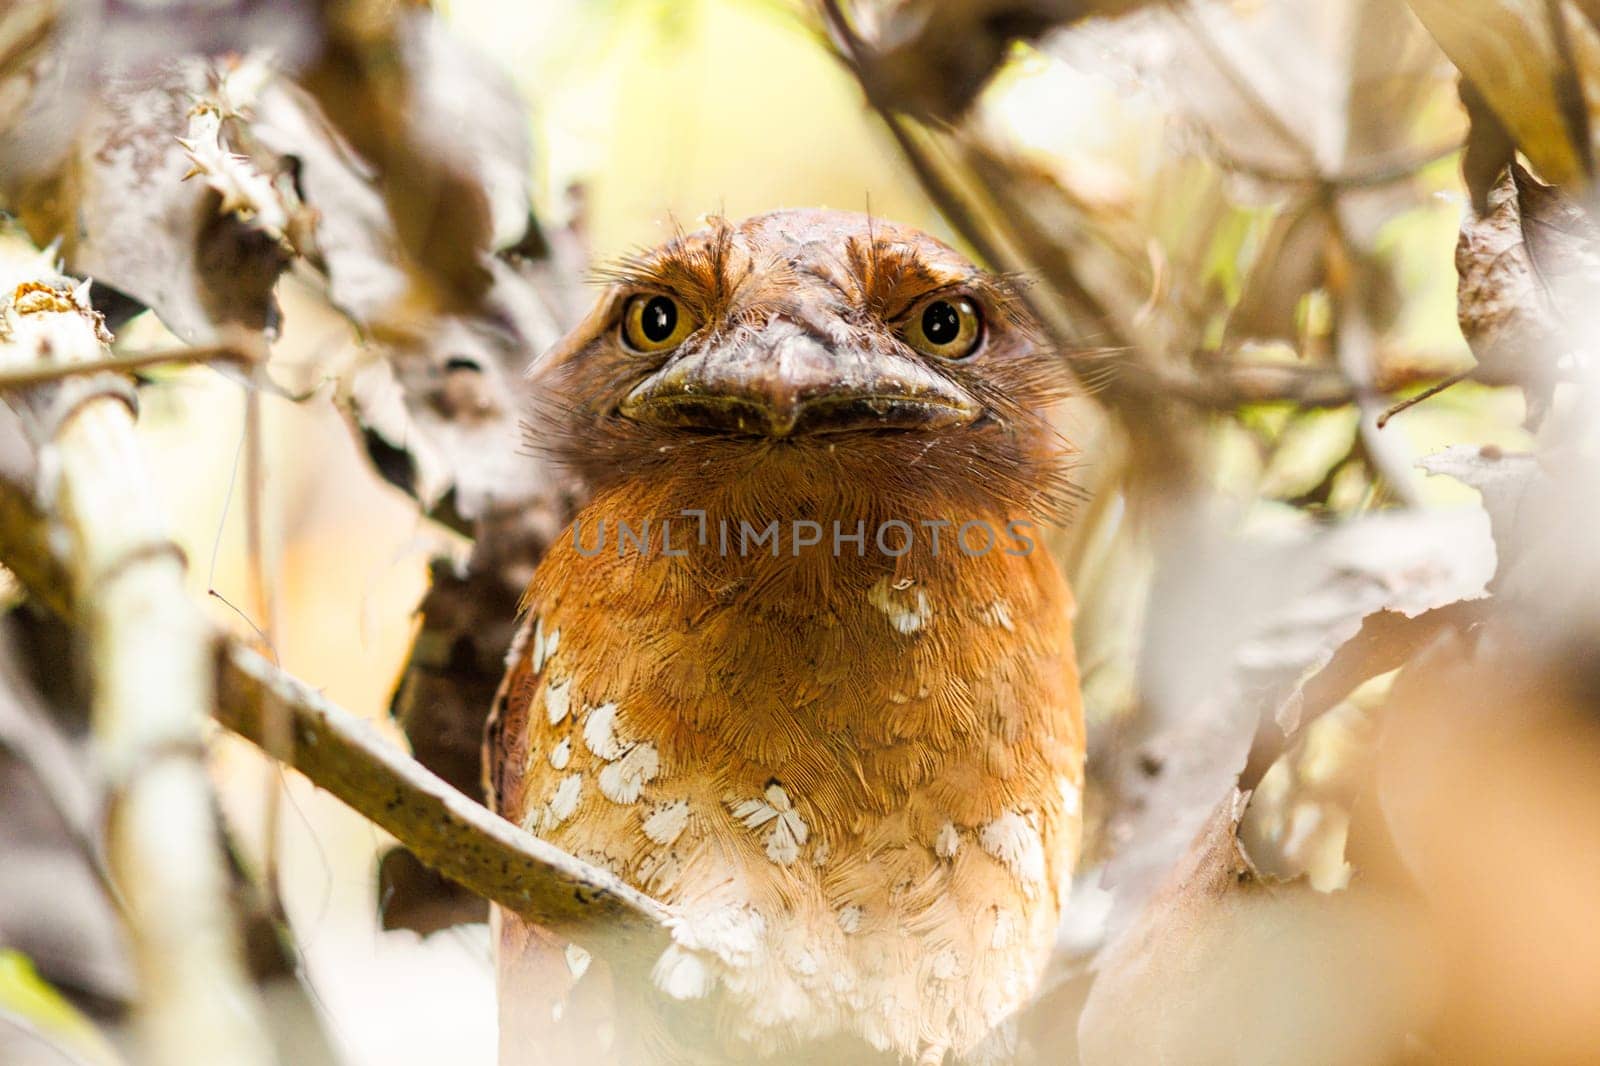 A femal Srilankan Frogmouth hiding in the vines by Rajh_Photography